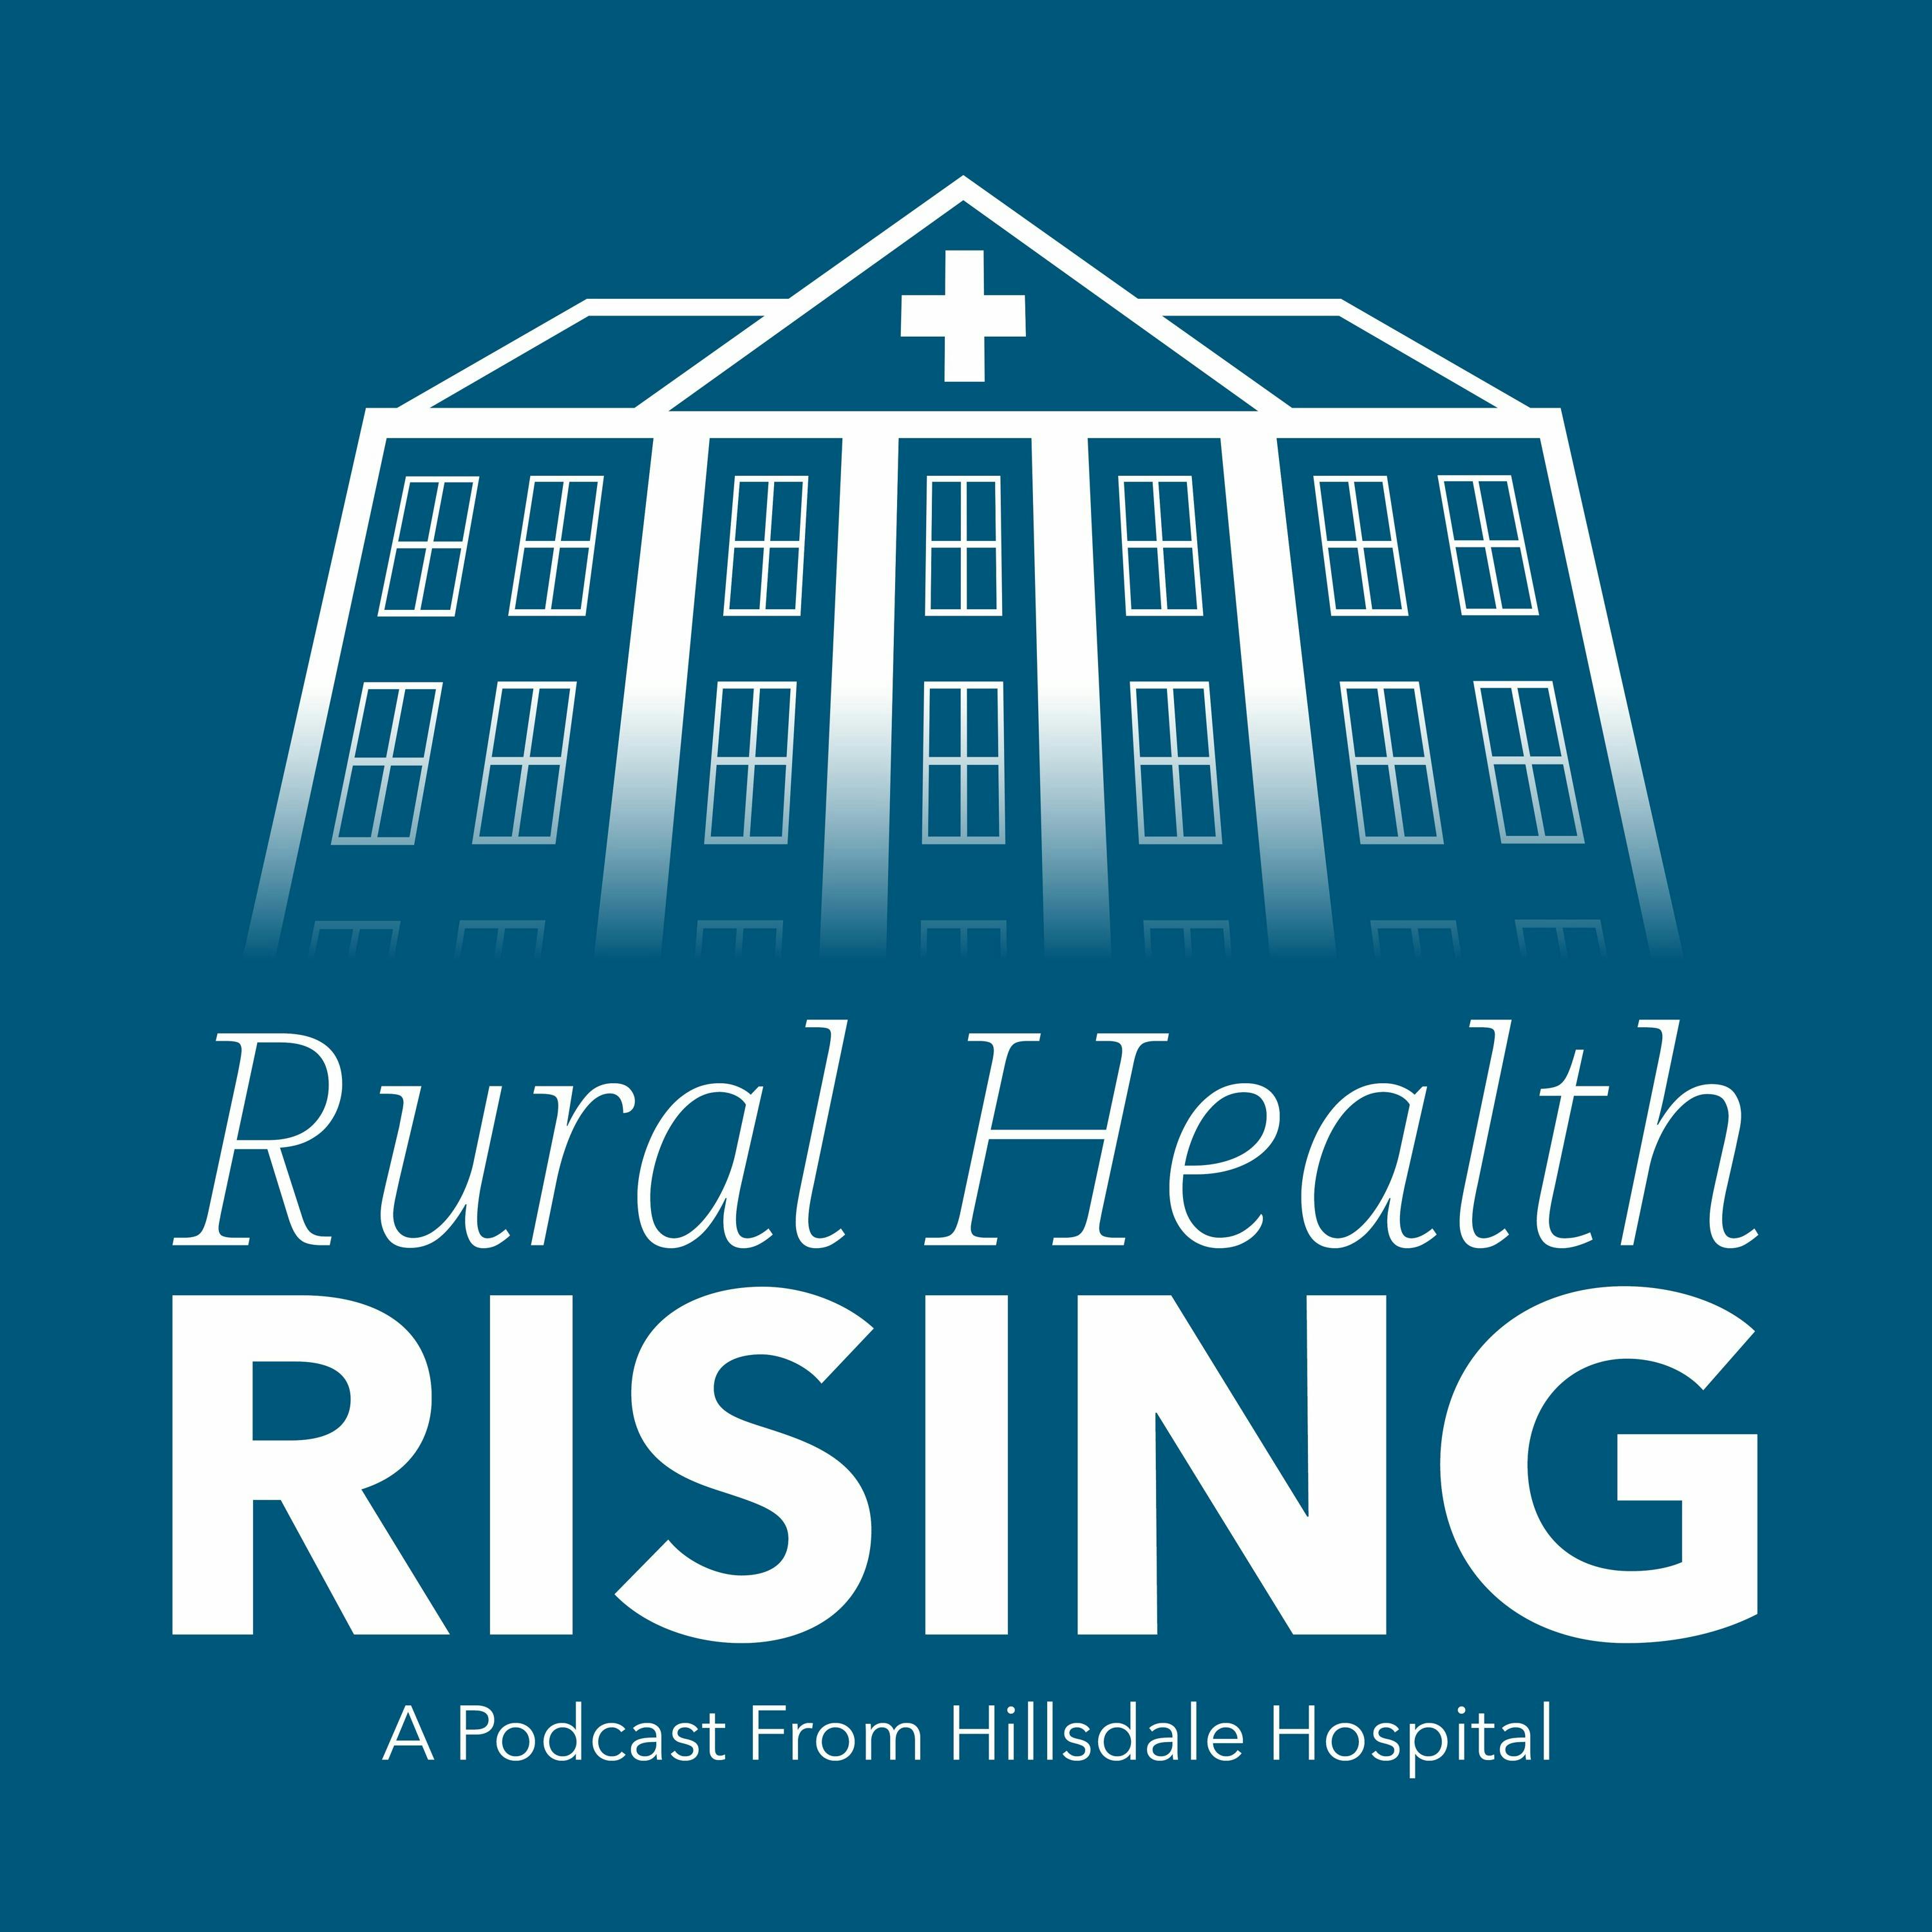 Episode 15: The 5 Ps of Rural Health: Profitability